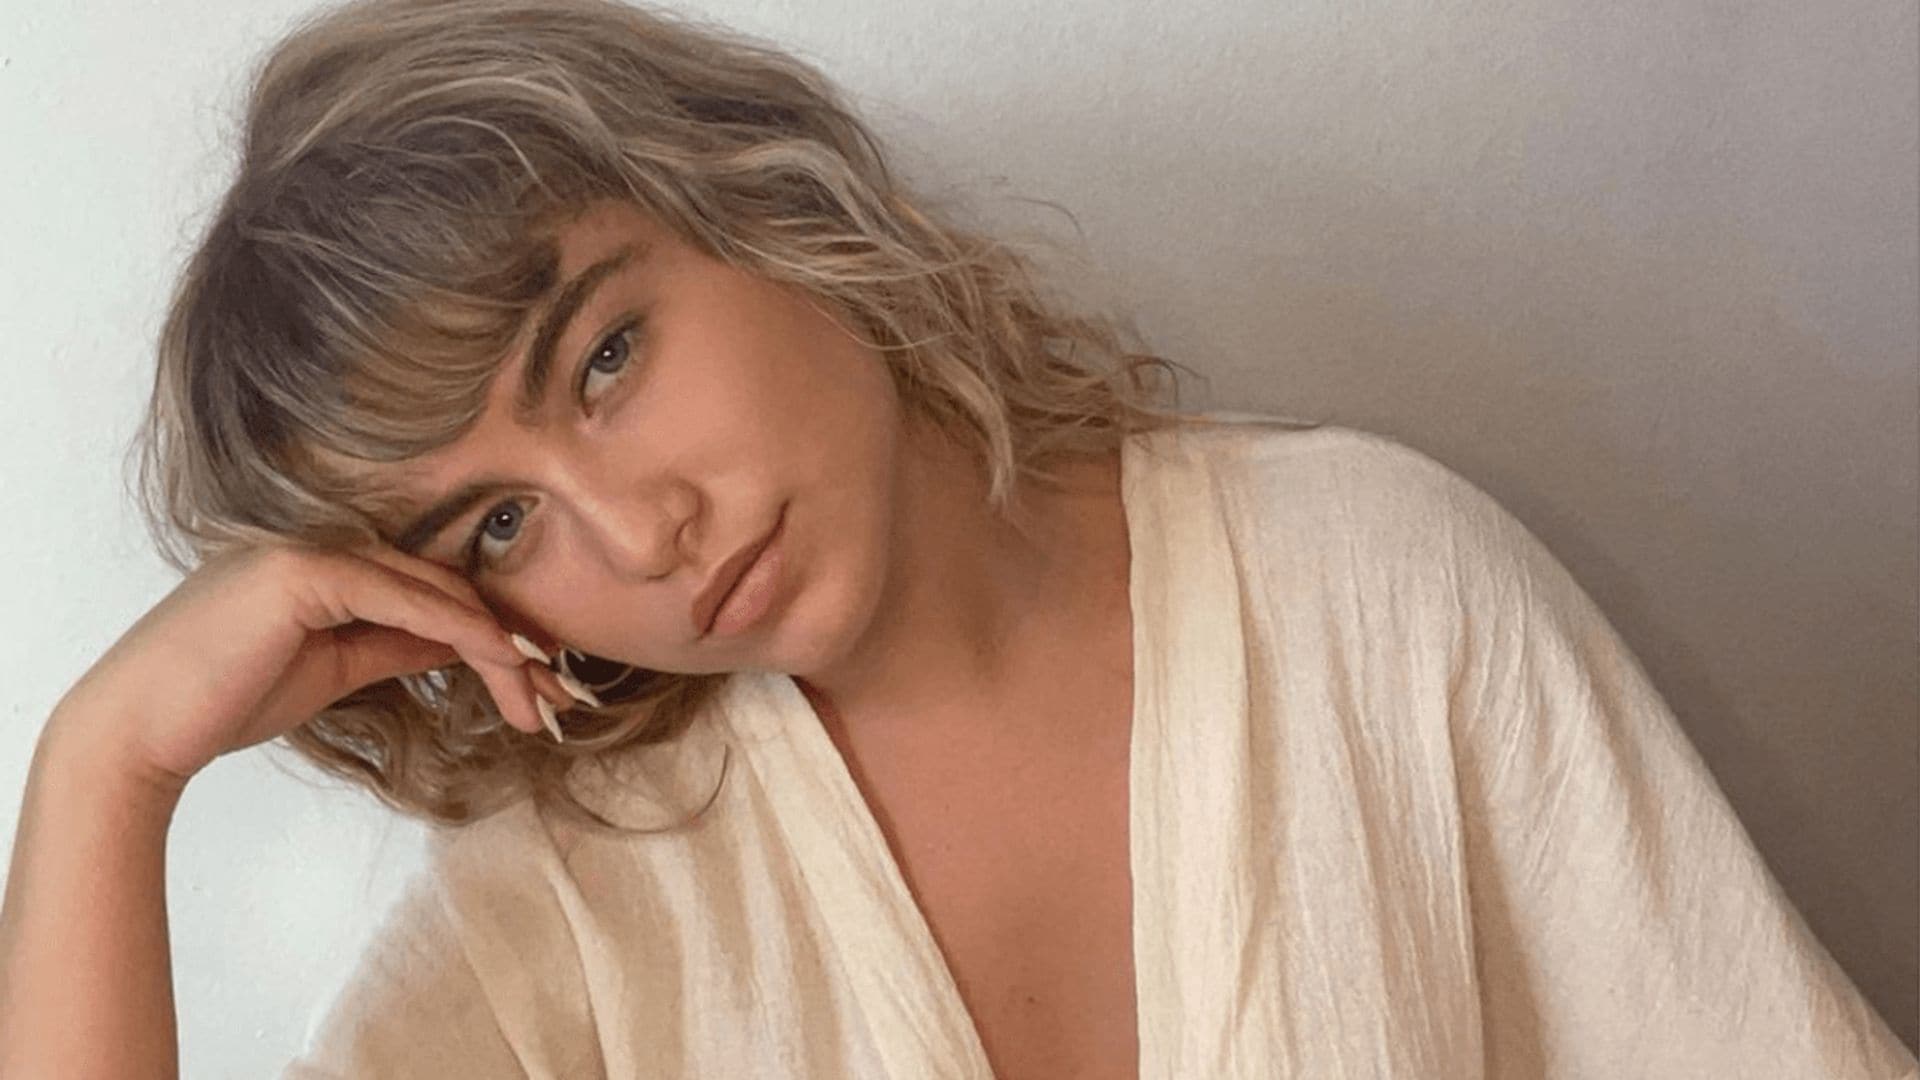 Sofia Reyes petitions to put Spanish word in the dictionary